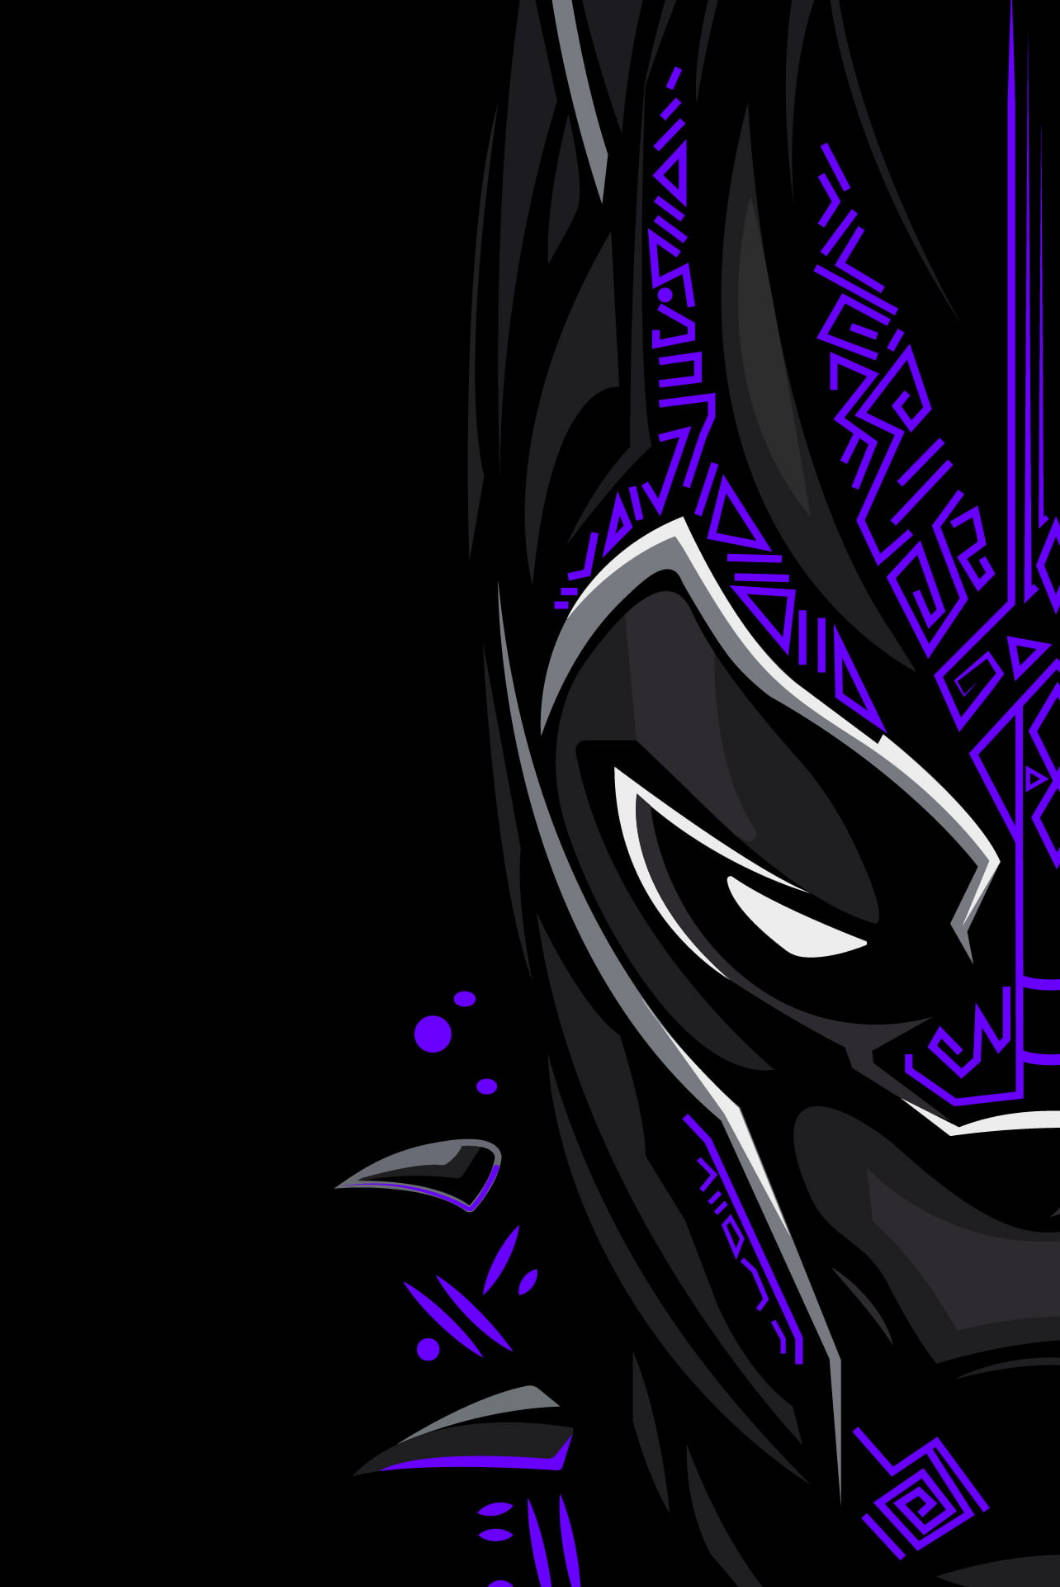 Black Panther Iphone 4s Background